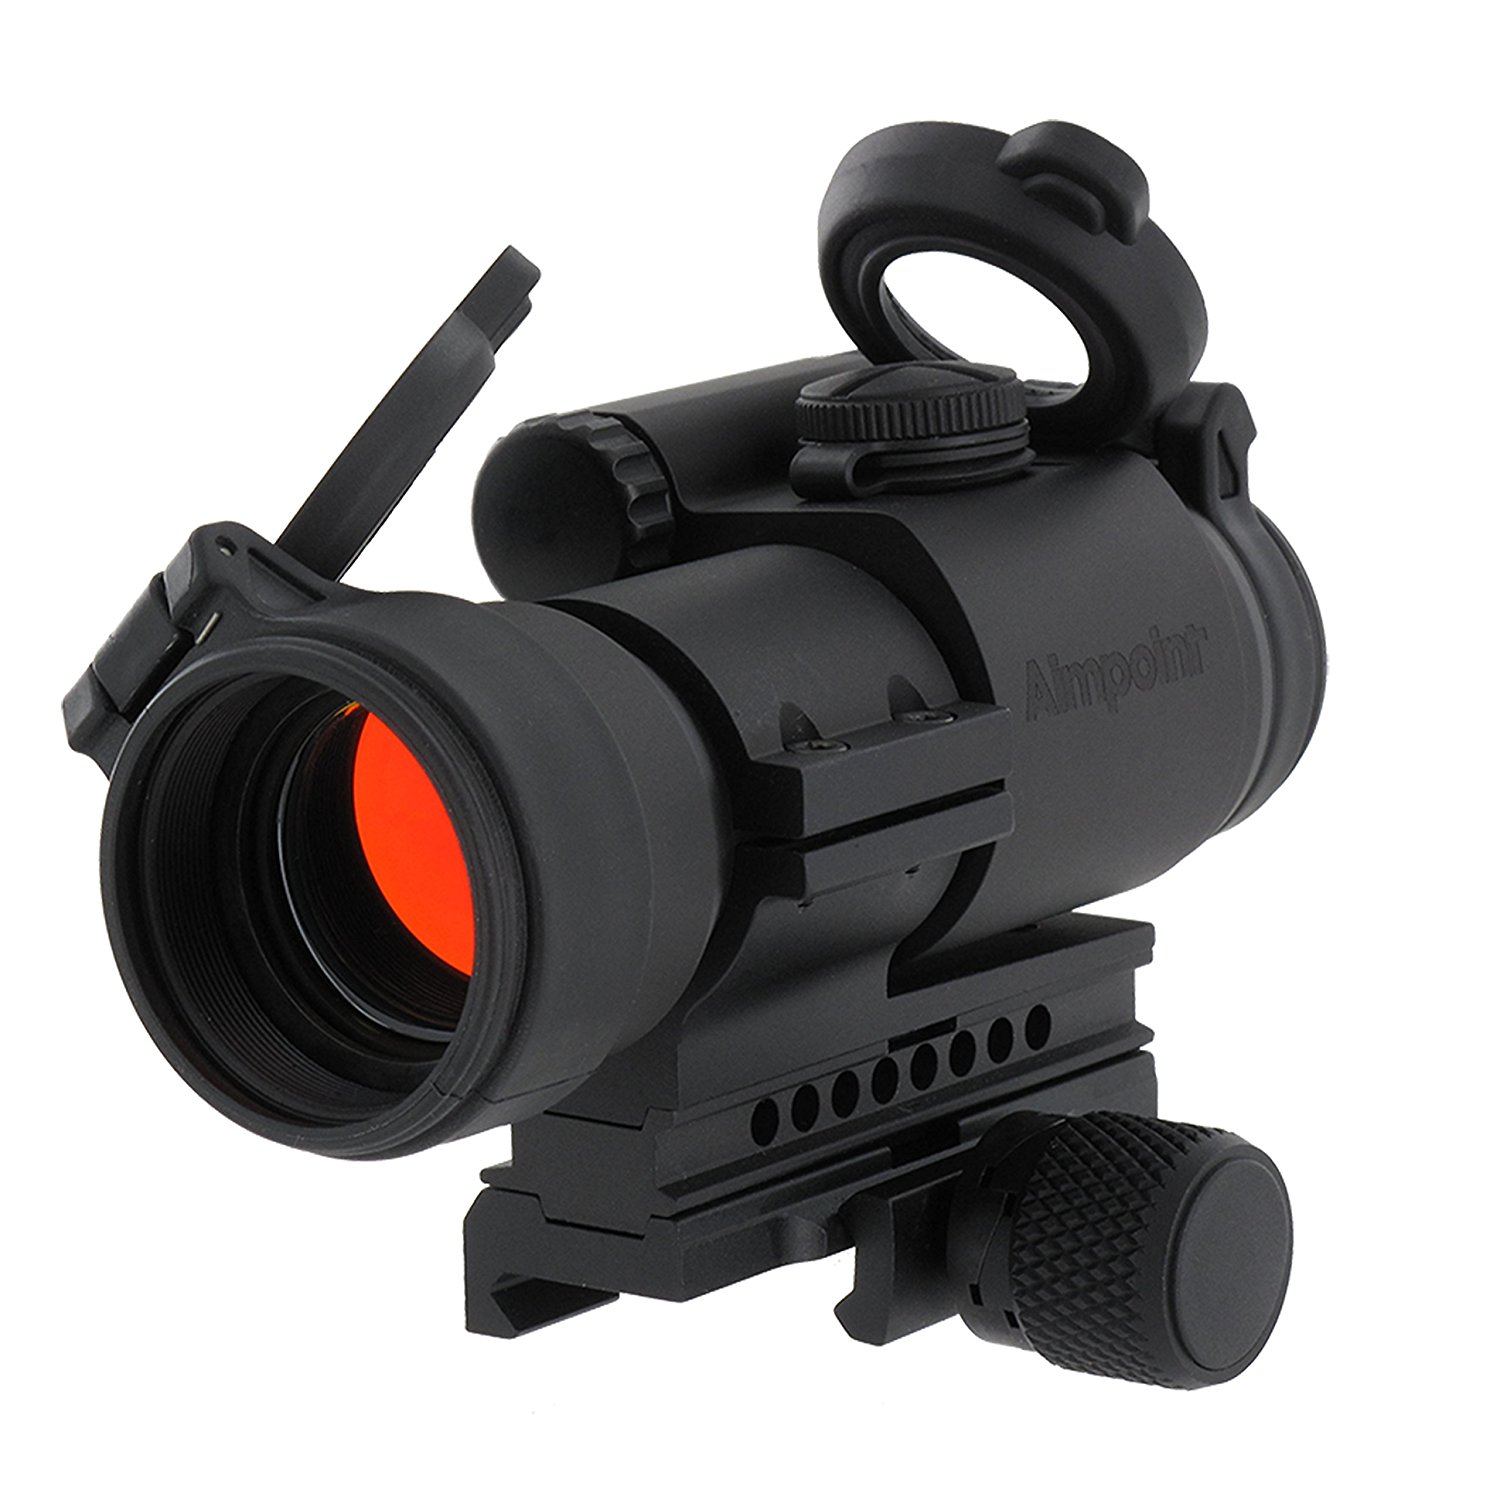 Aimpoint PRO - Used Like New for $312.42